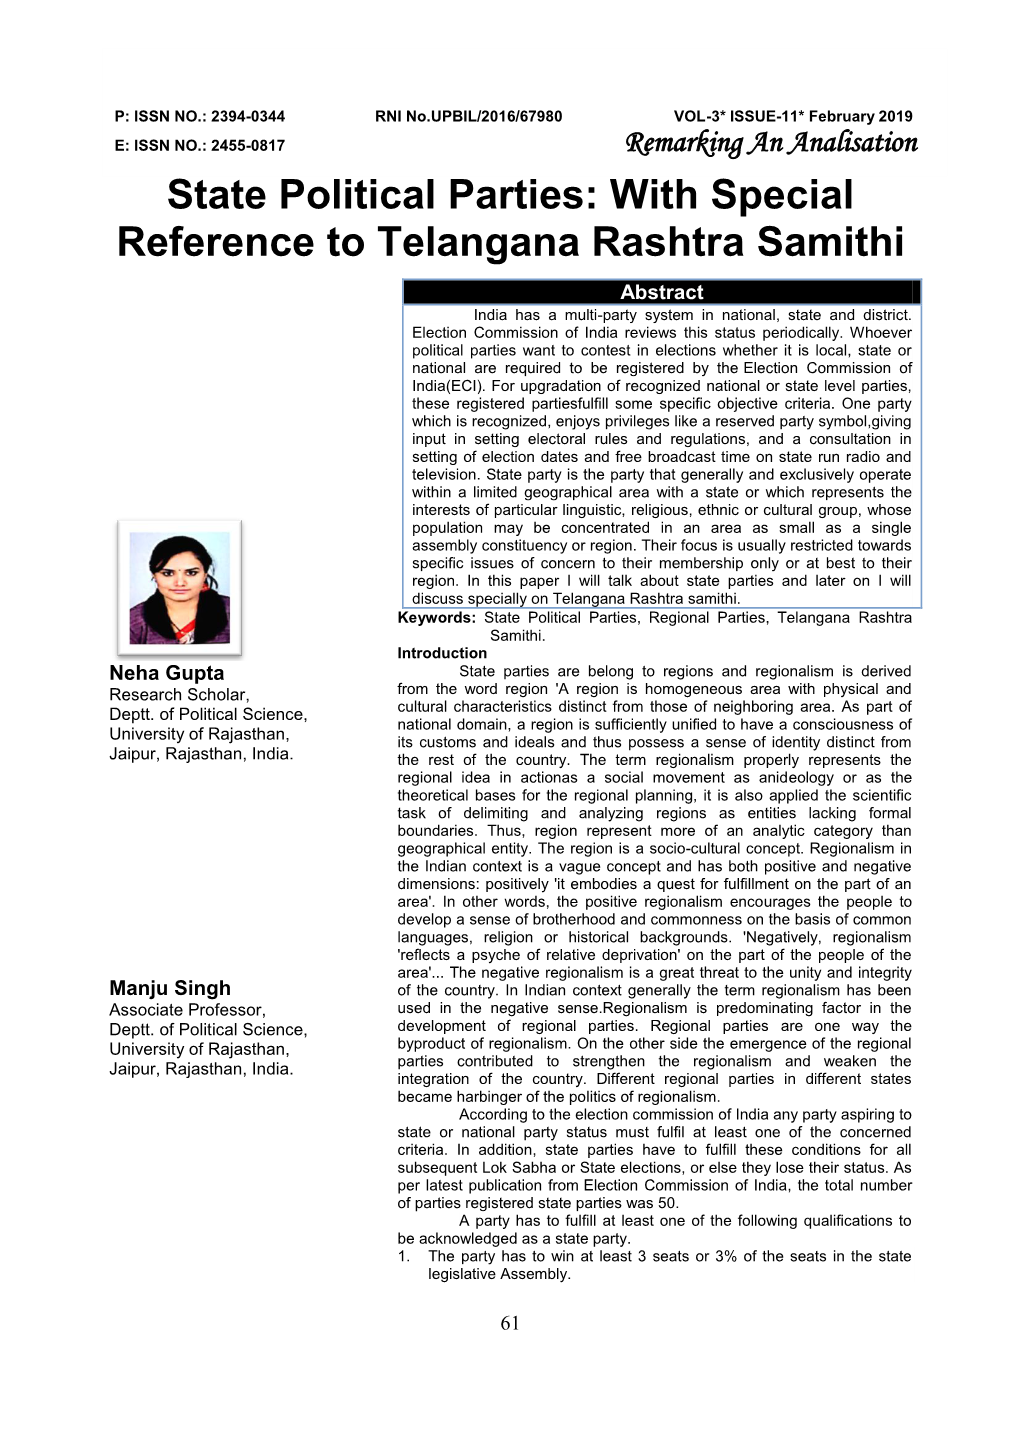 State Political Parties: with Special Reference to Telangana Rashtra Samithi Abstract India Has a Multi-Party System in National, State and District